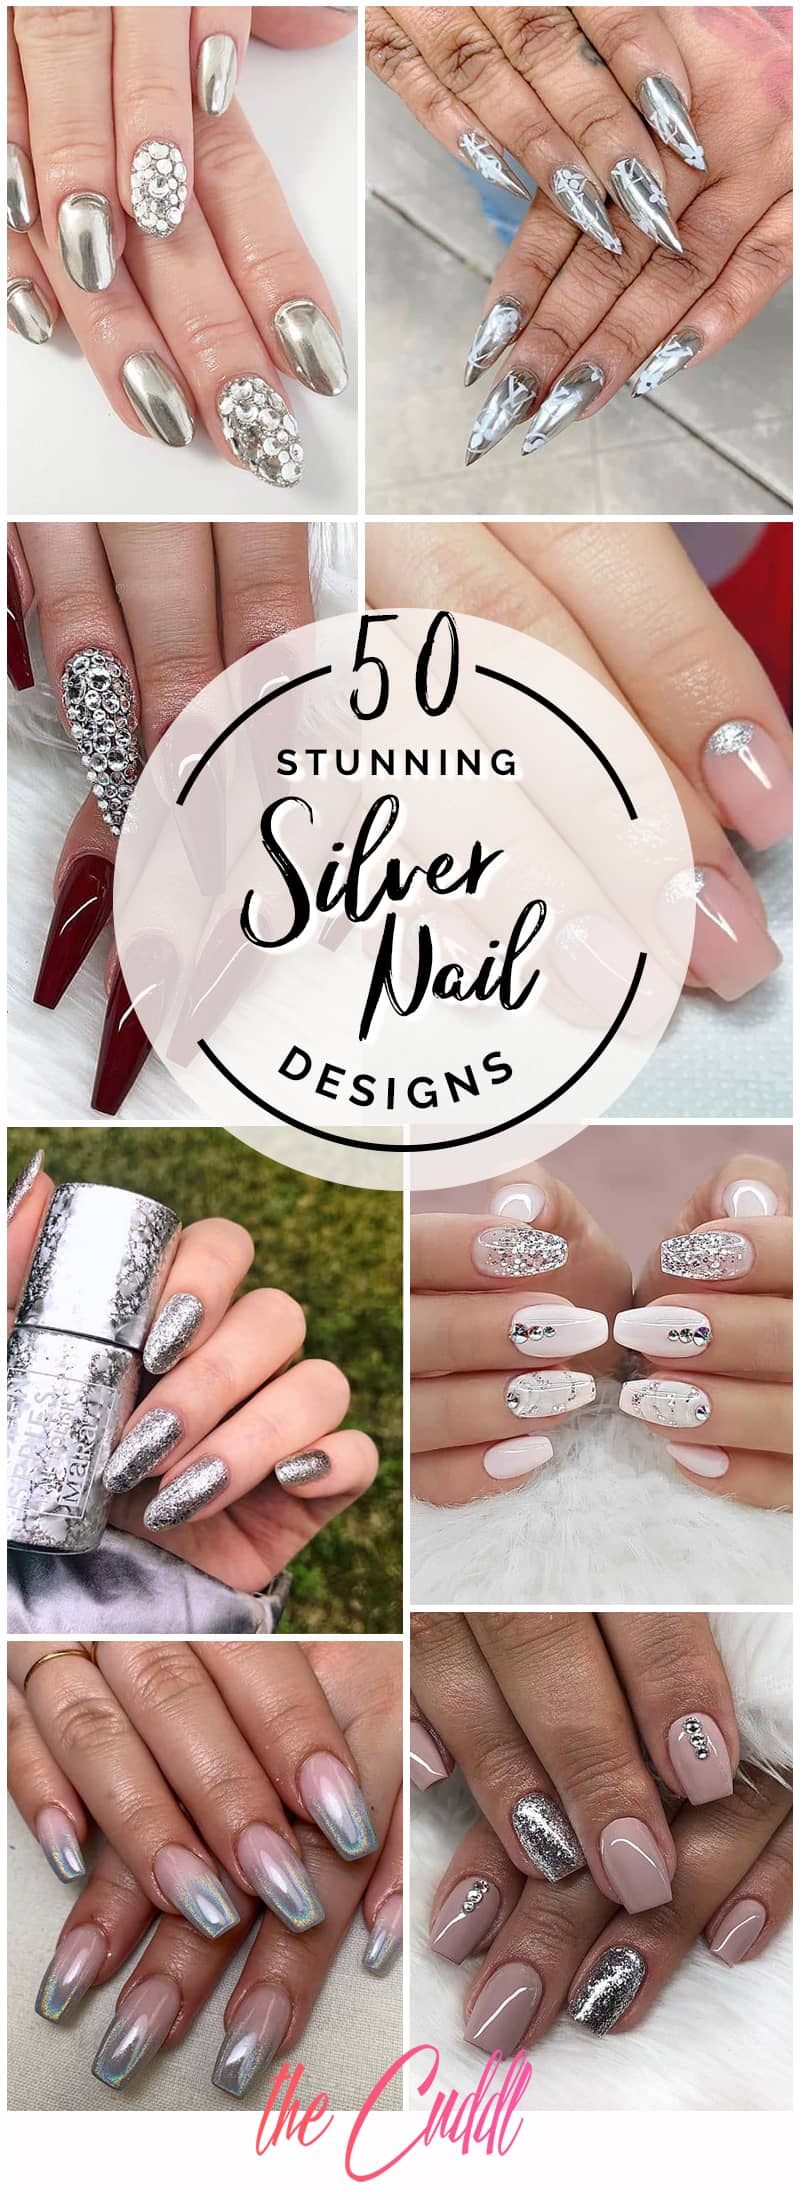 50 Awesome Silver Nail Ideas for Any Occasion